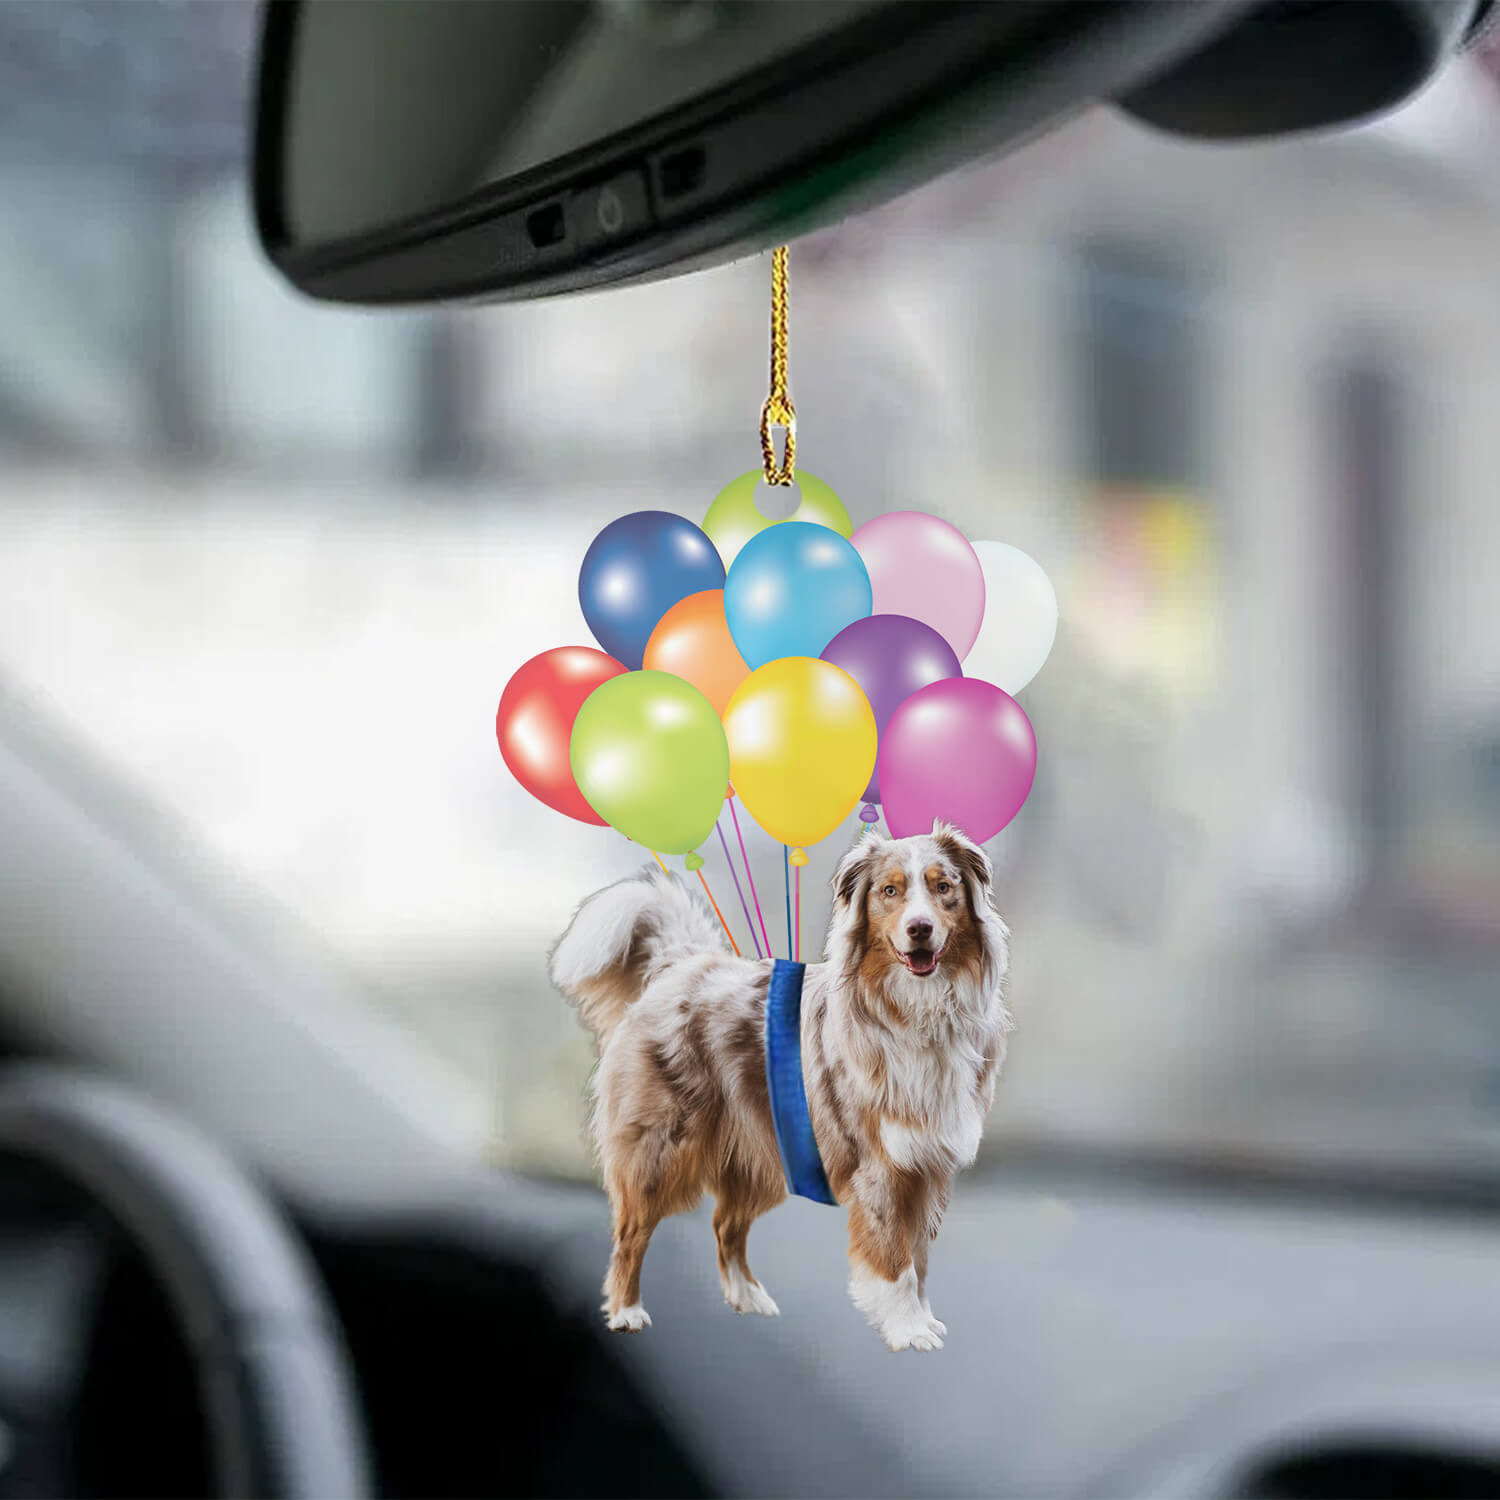 Balloon Dog Ornament Australian Shepherd Dog Fly With Bubbles Dog Hanging Ornament Car Ornament Coolspod